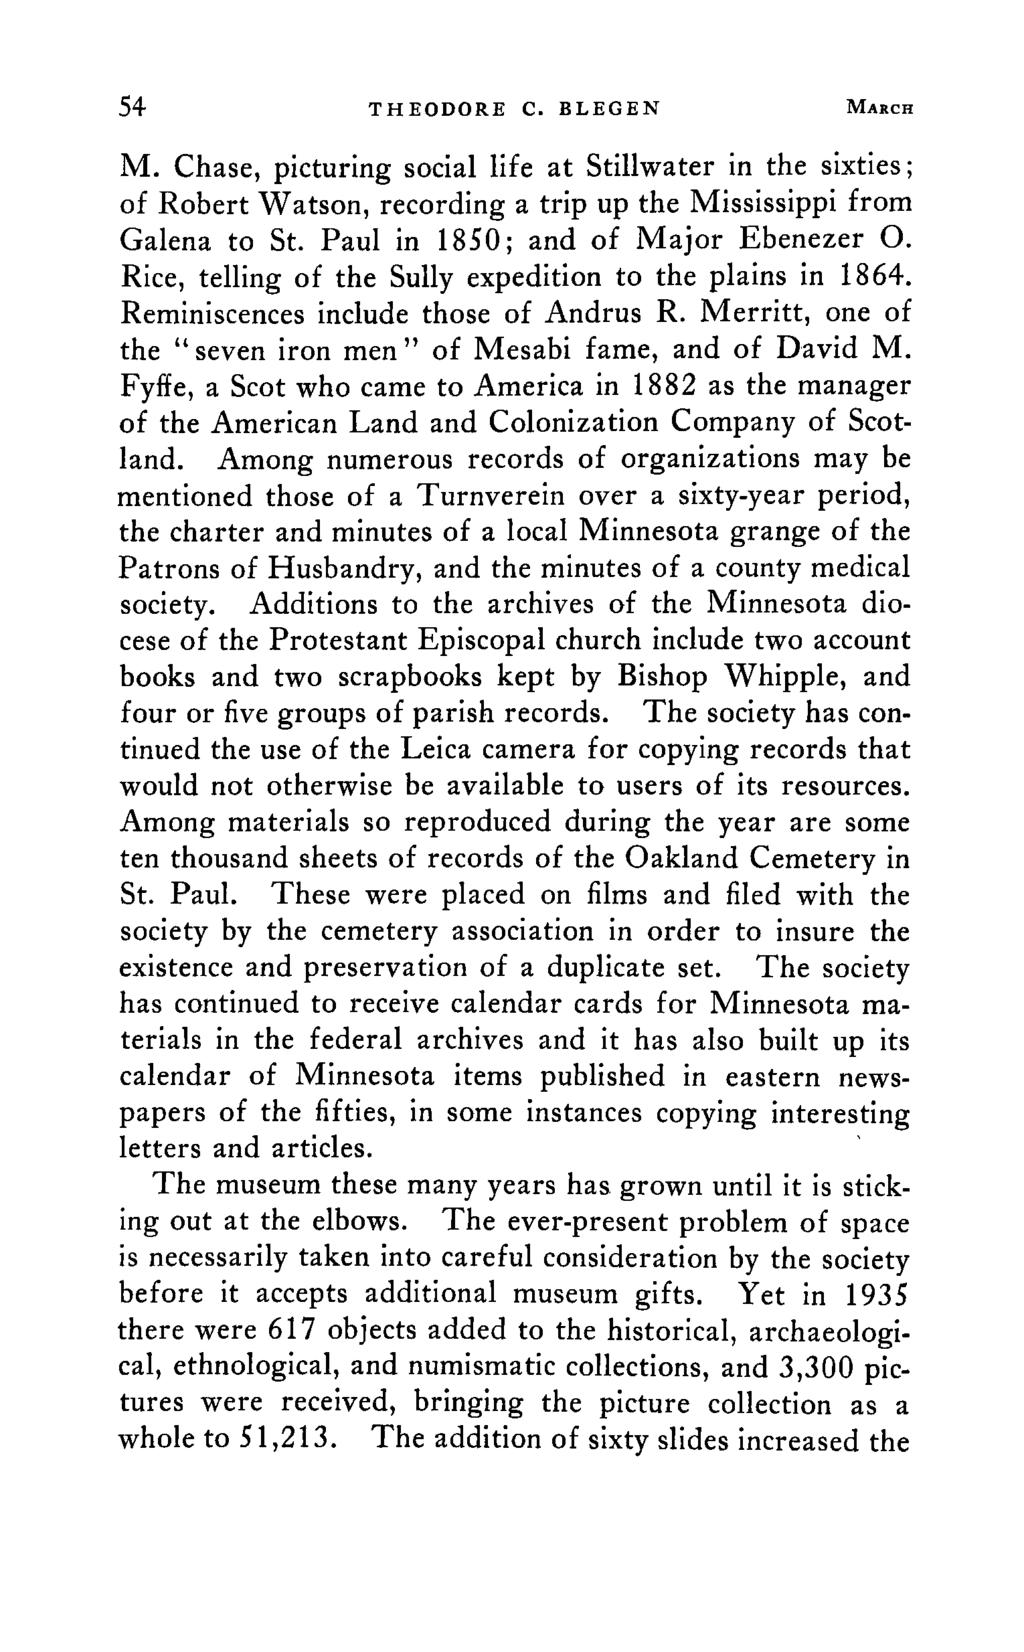 54 THEODORE C. BLEGEN MARCH M. Chase, picturing social Hfe at Stillwater in the sixties; of Robert Watson, recording a trip up the Mississippi from Galena to St. Paul in 1850; and of Major Ebenezer O.